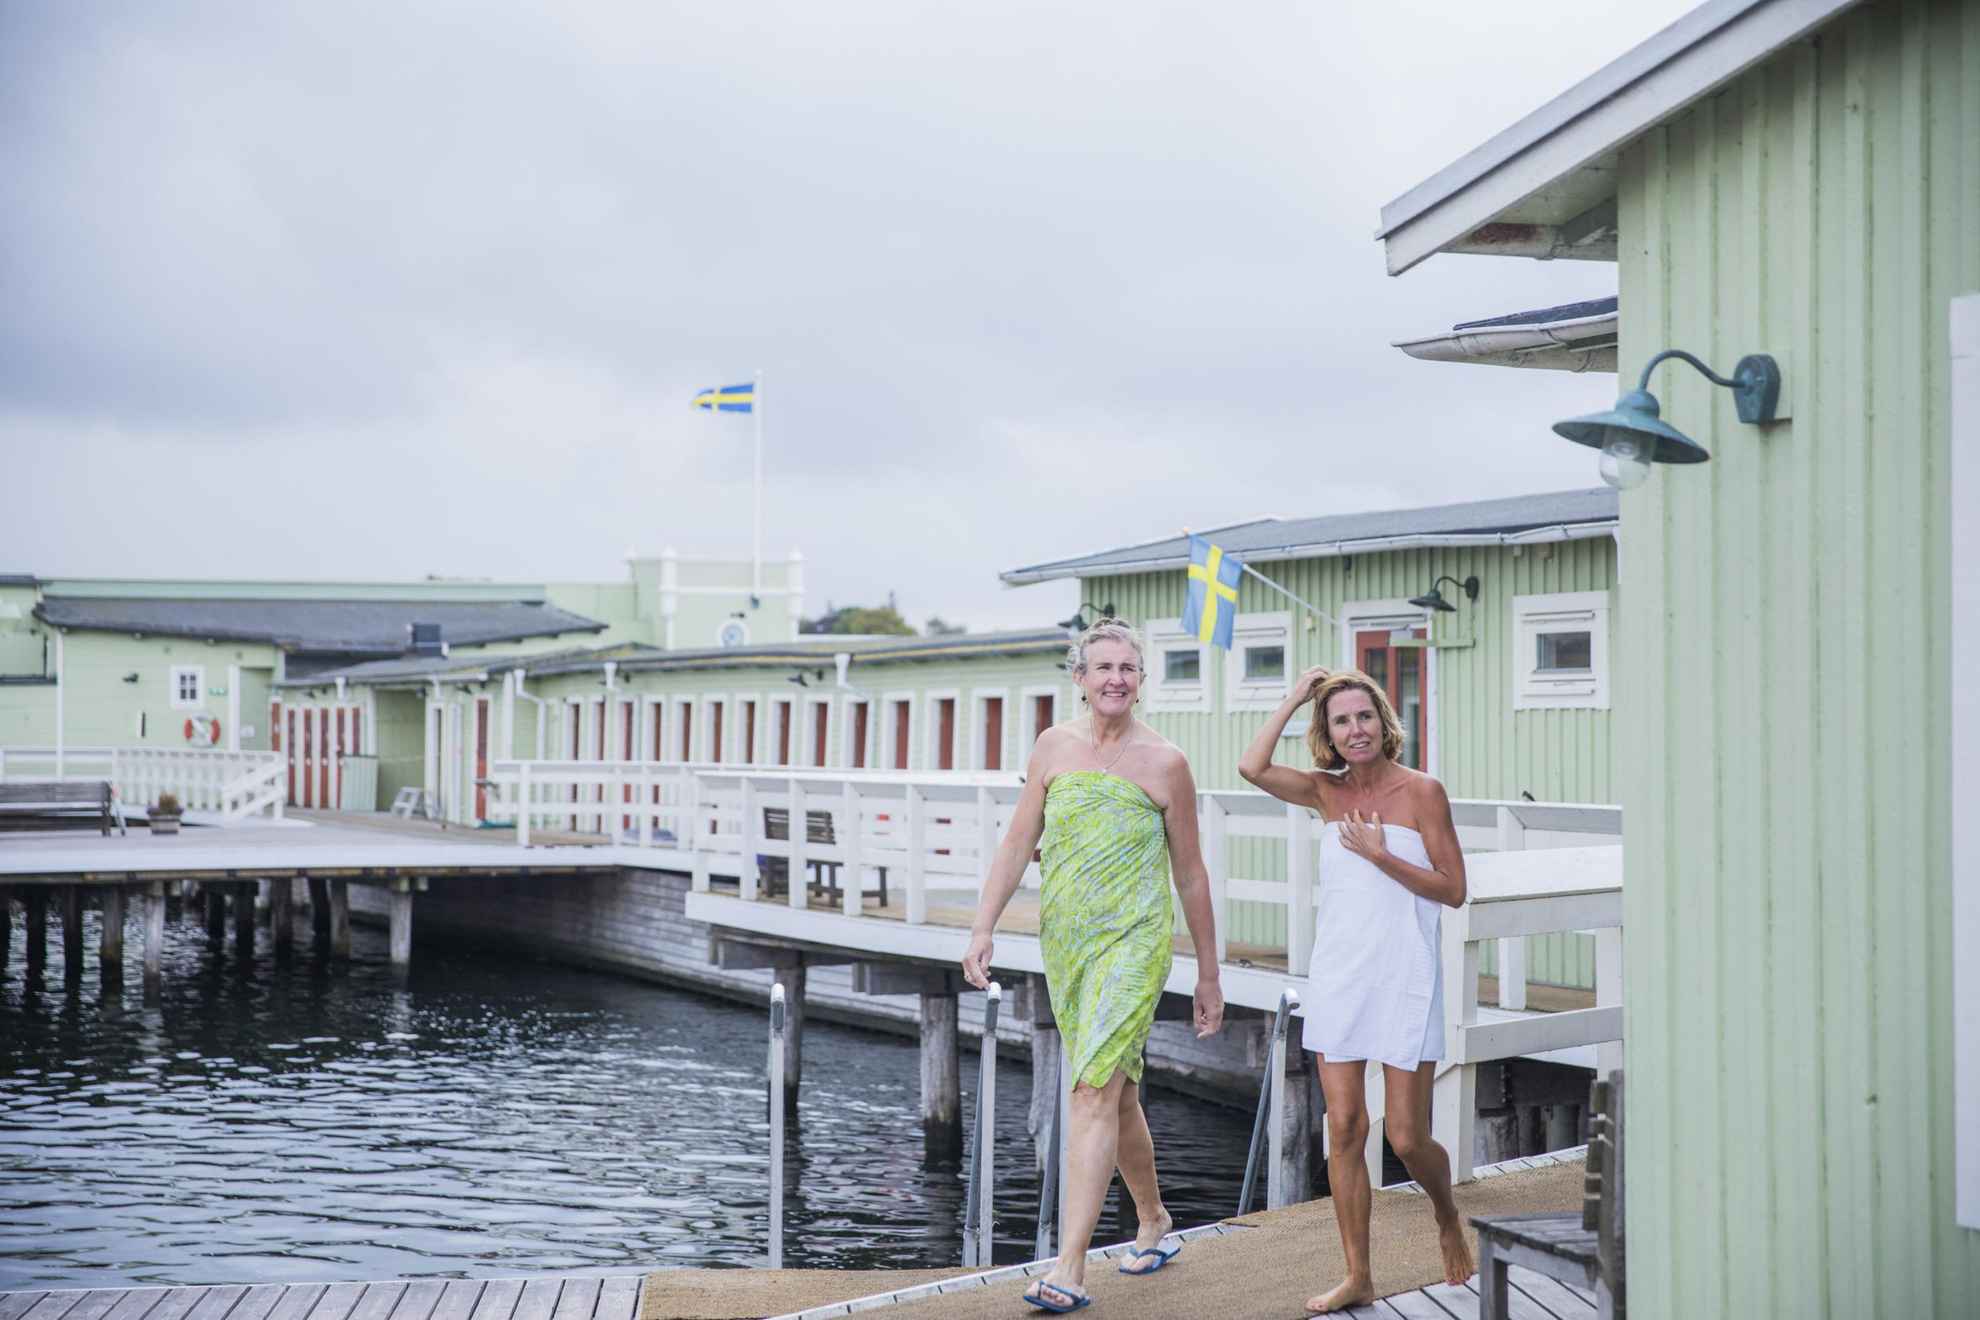 Two older ladies is going for an outdoor swim. They are both wearing towels and are walking on the decks of the open-air cold bath house of Ribersborg. The sky is grey and there is no sunlight visible.